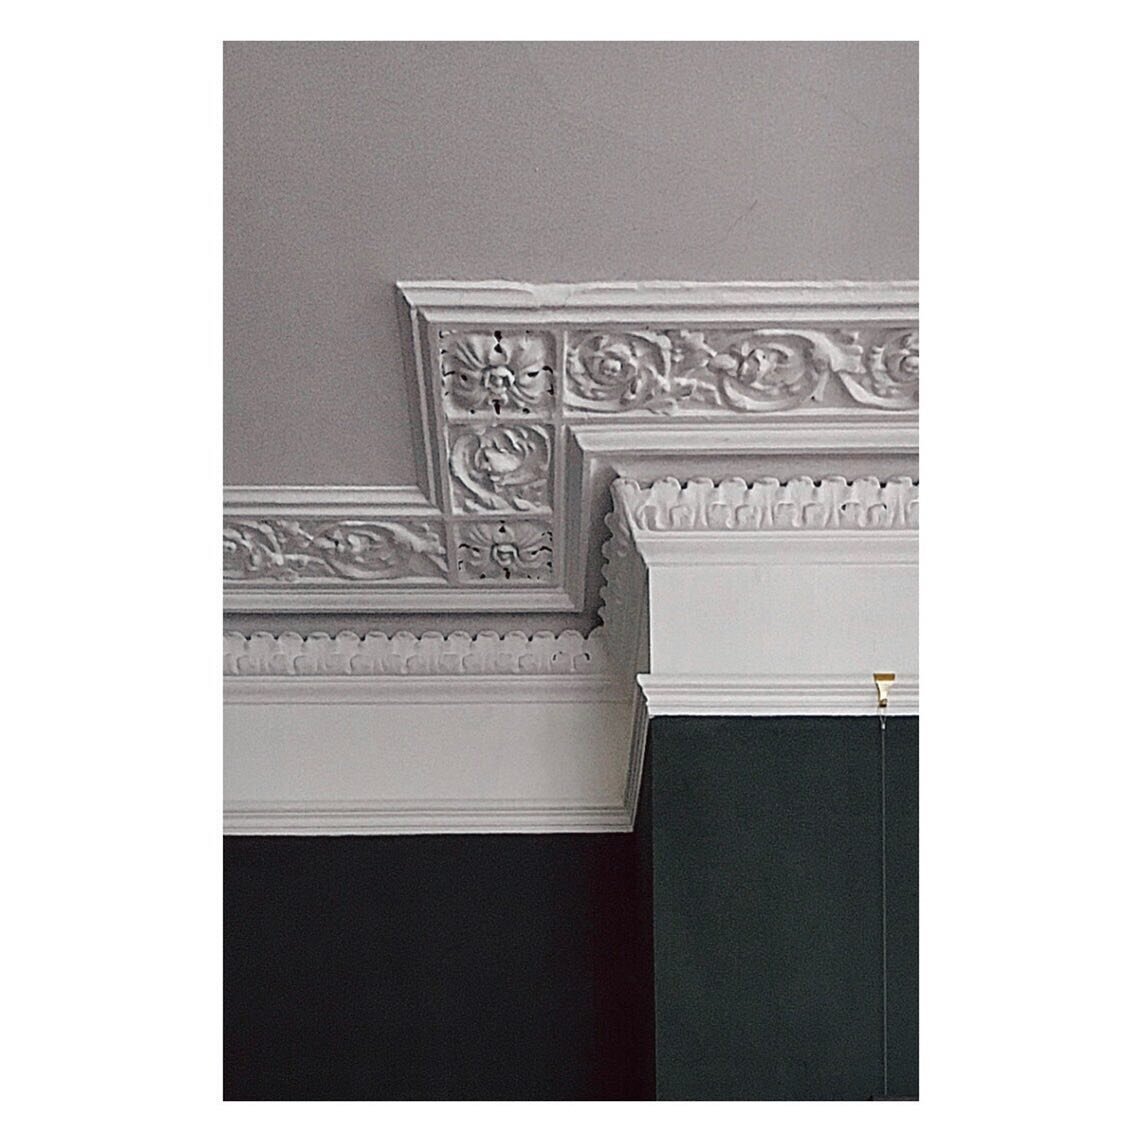 Site details from our current project in a lovely old Victorian Villa..
.
.
.
.
#perioddetails #periidhome #bespokekitchen #kitchenproject #interiordesign